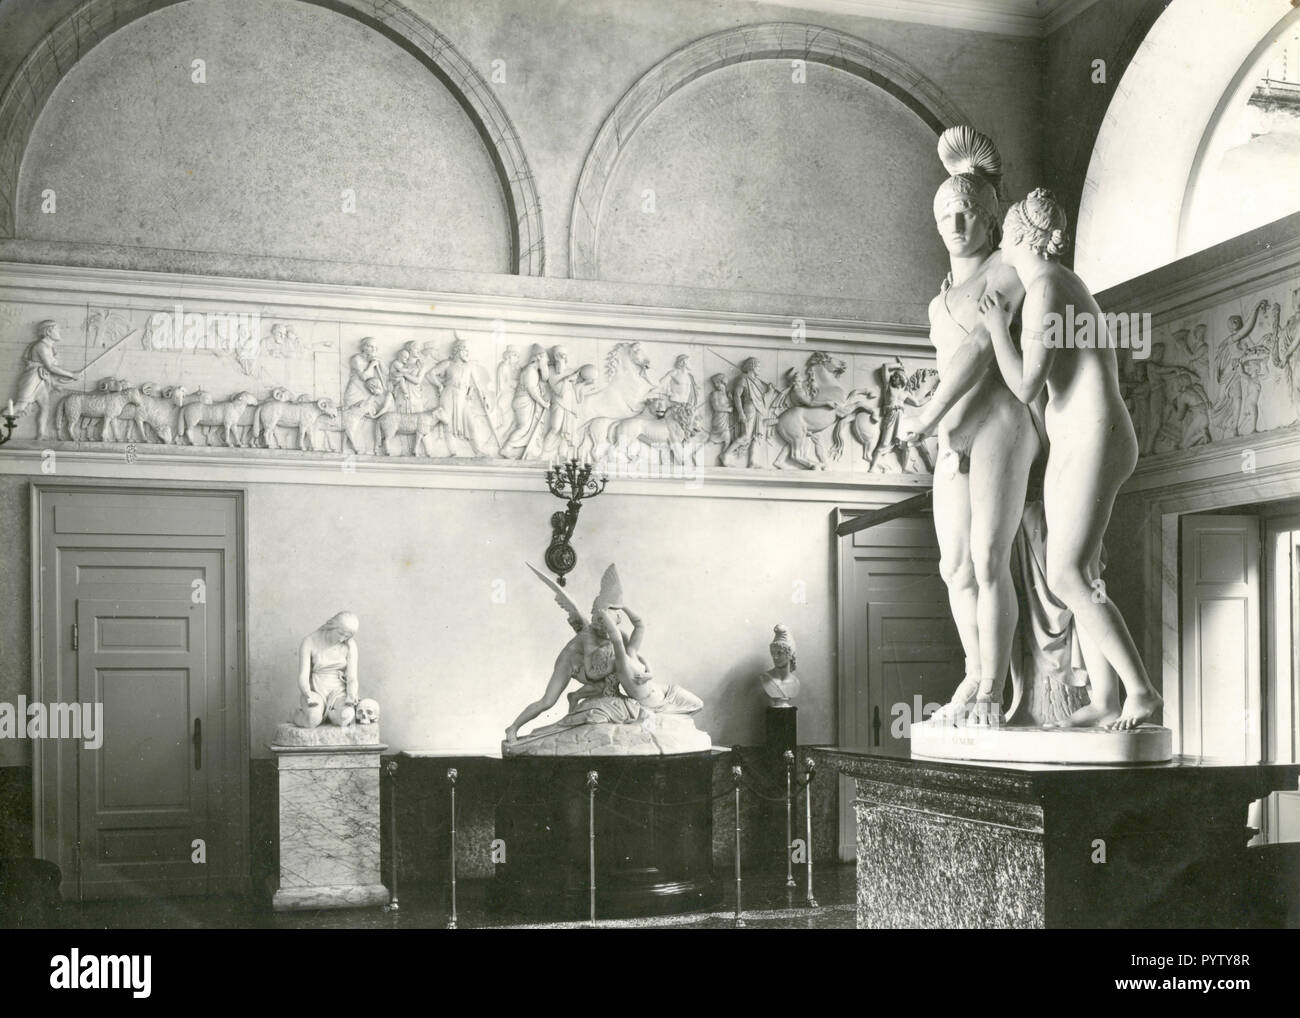 Cupid and Psyche and other statues, Villa Carlotta, Italy 1920s Stock Photo